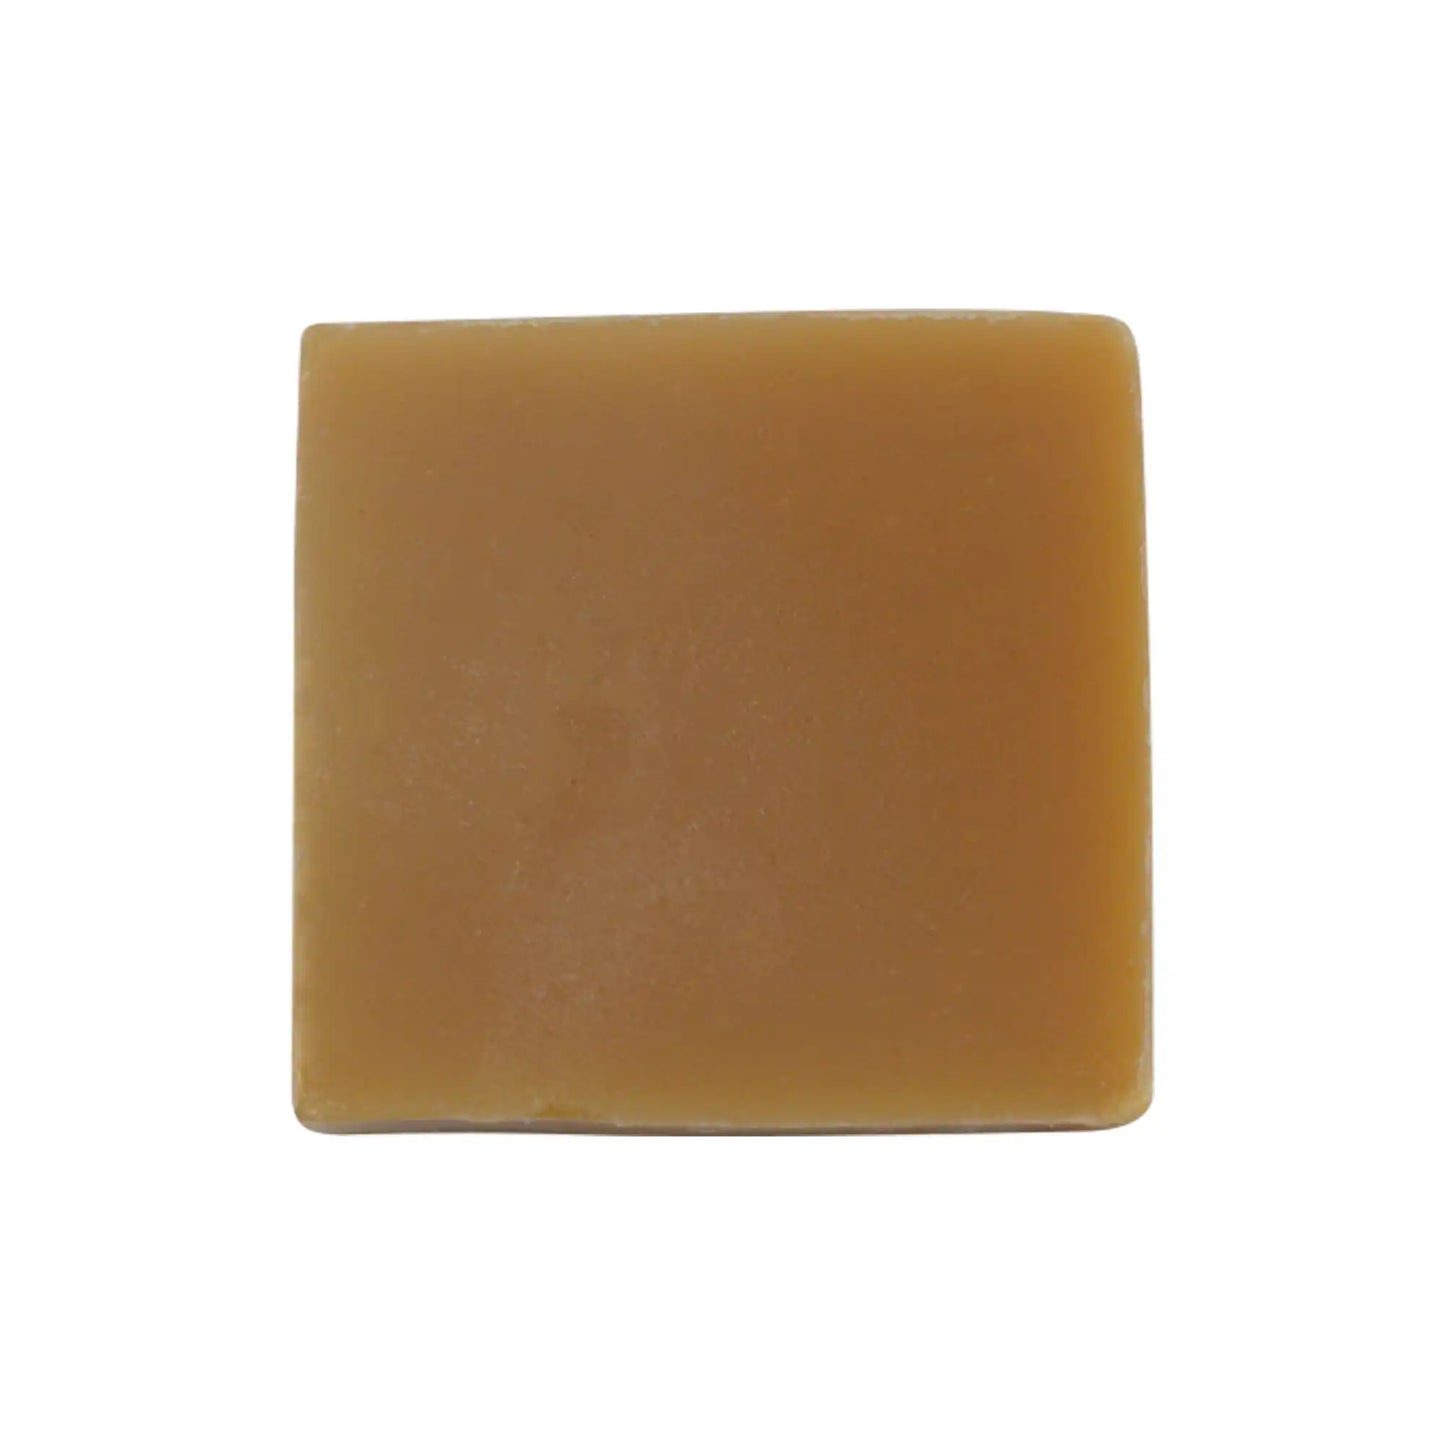 Cruisin Organics Tackle Turmeric Soap. This natural soap is perfect for tackling dull skin, dark circles, and acne scarring. With revitalizing vitamin E and a bioactive component called curcumin, turmeric offers a multitude of cosmetic benefits. After just one use, you'll notice a healthy glow